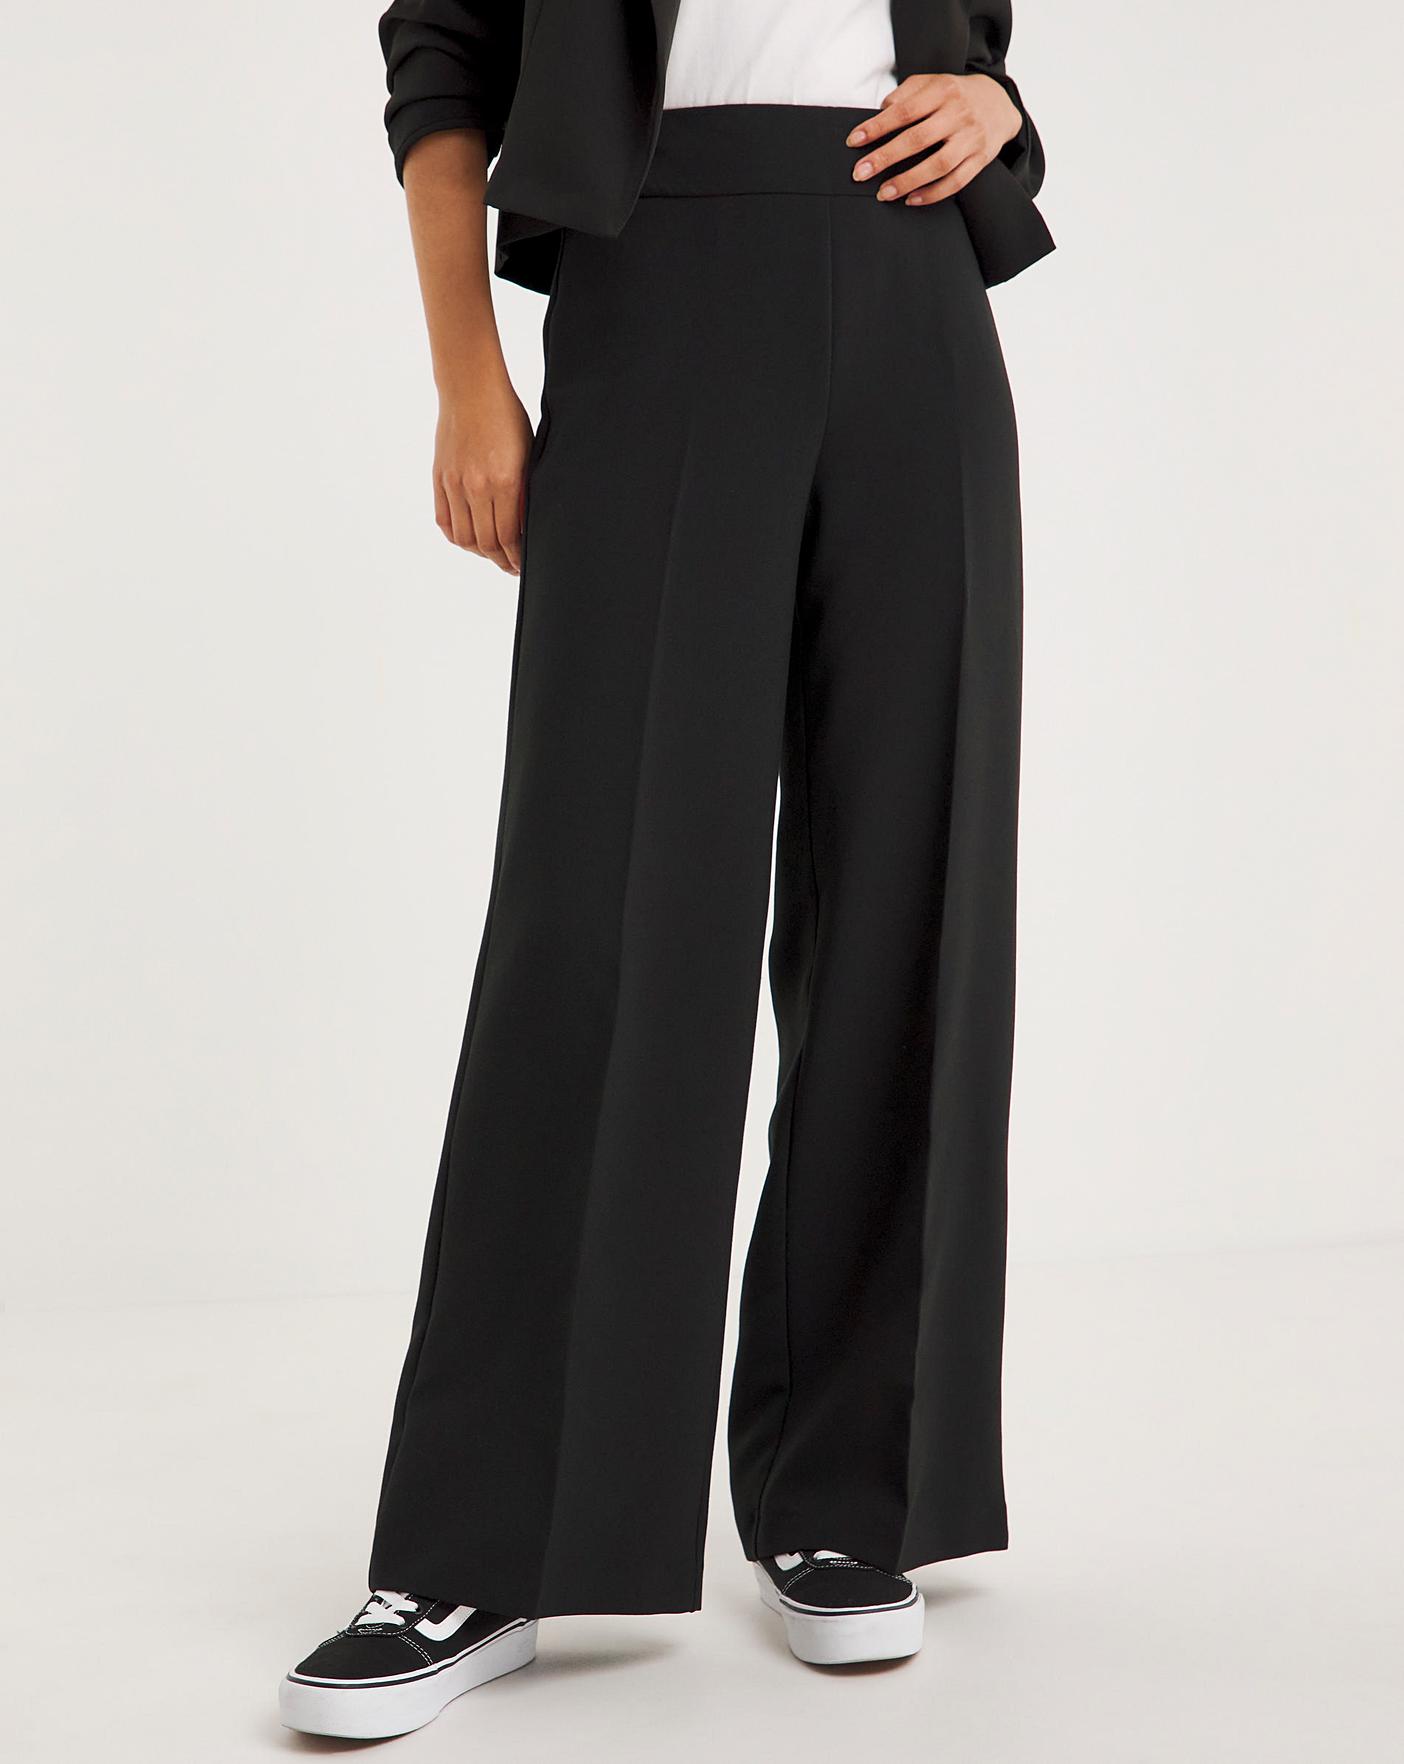 Elendra Women Black Wide Leg Loose Fit High-Rise Stretchable Formal Trousers